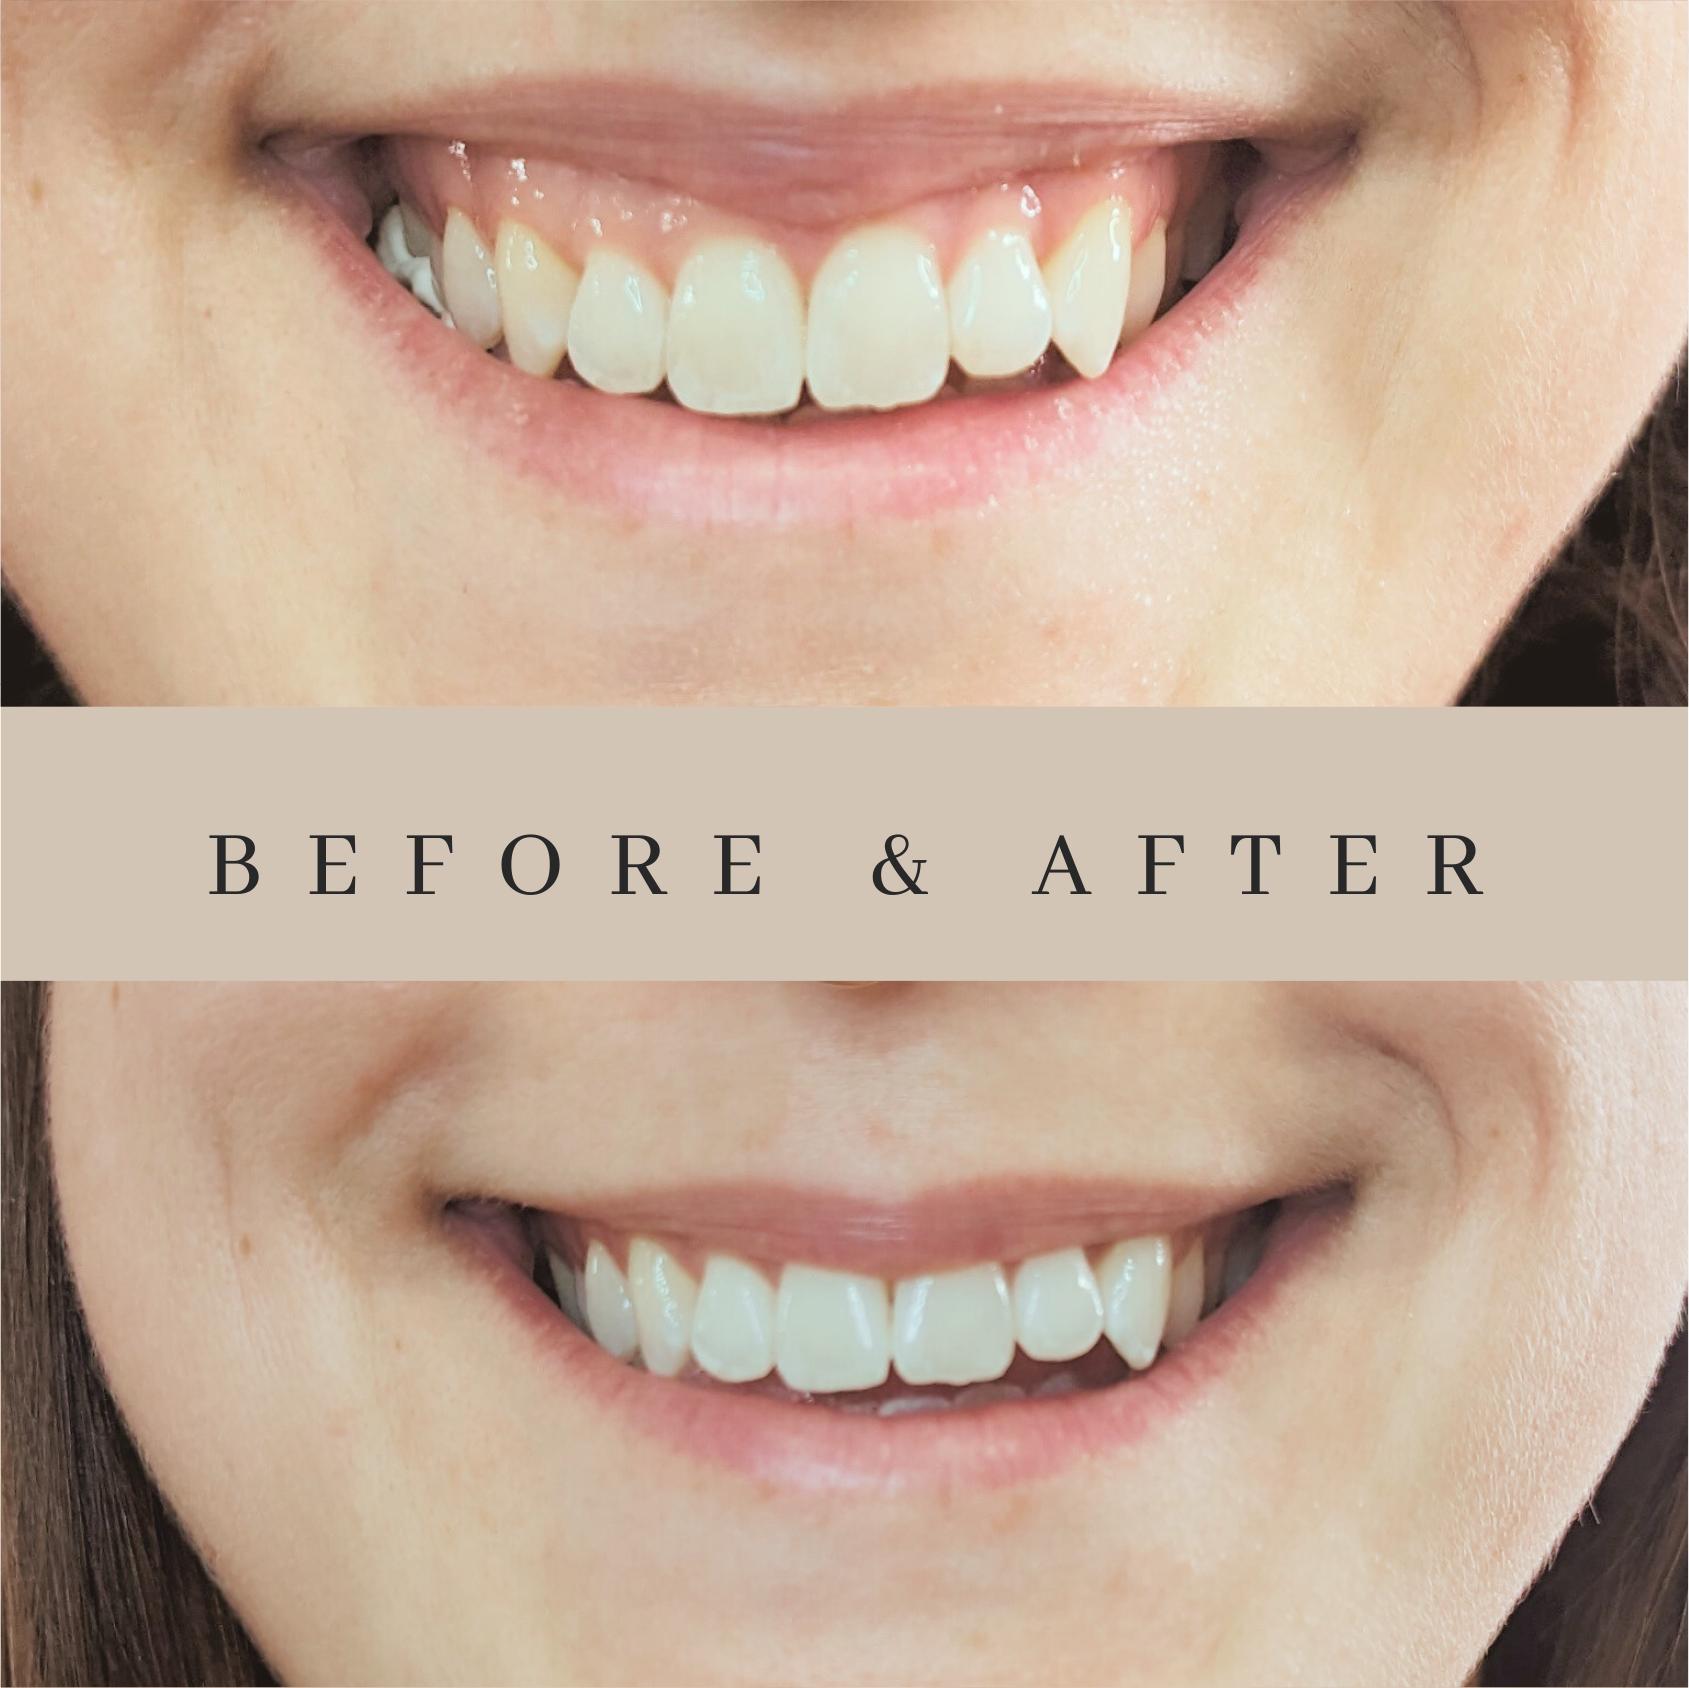 A before and after photo of a woman 's teeth